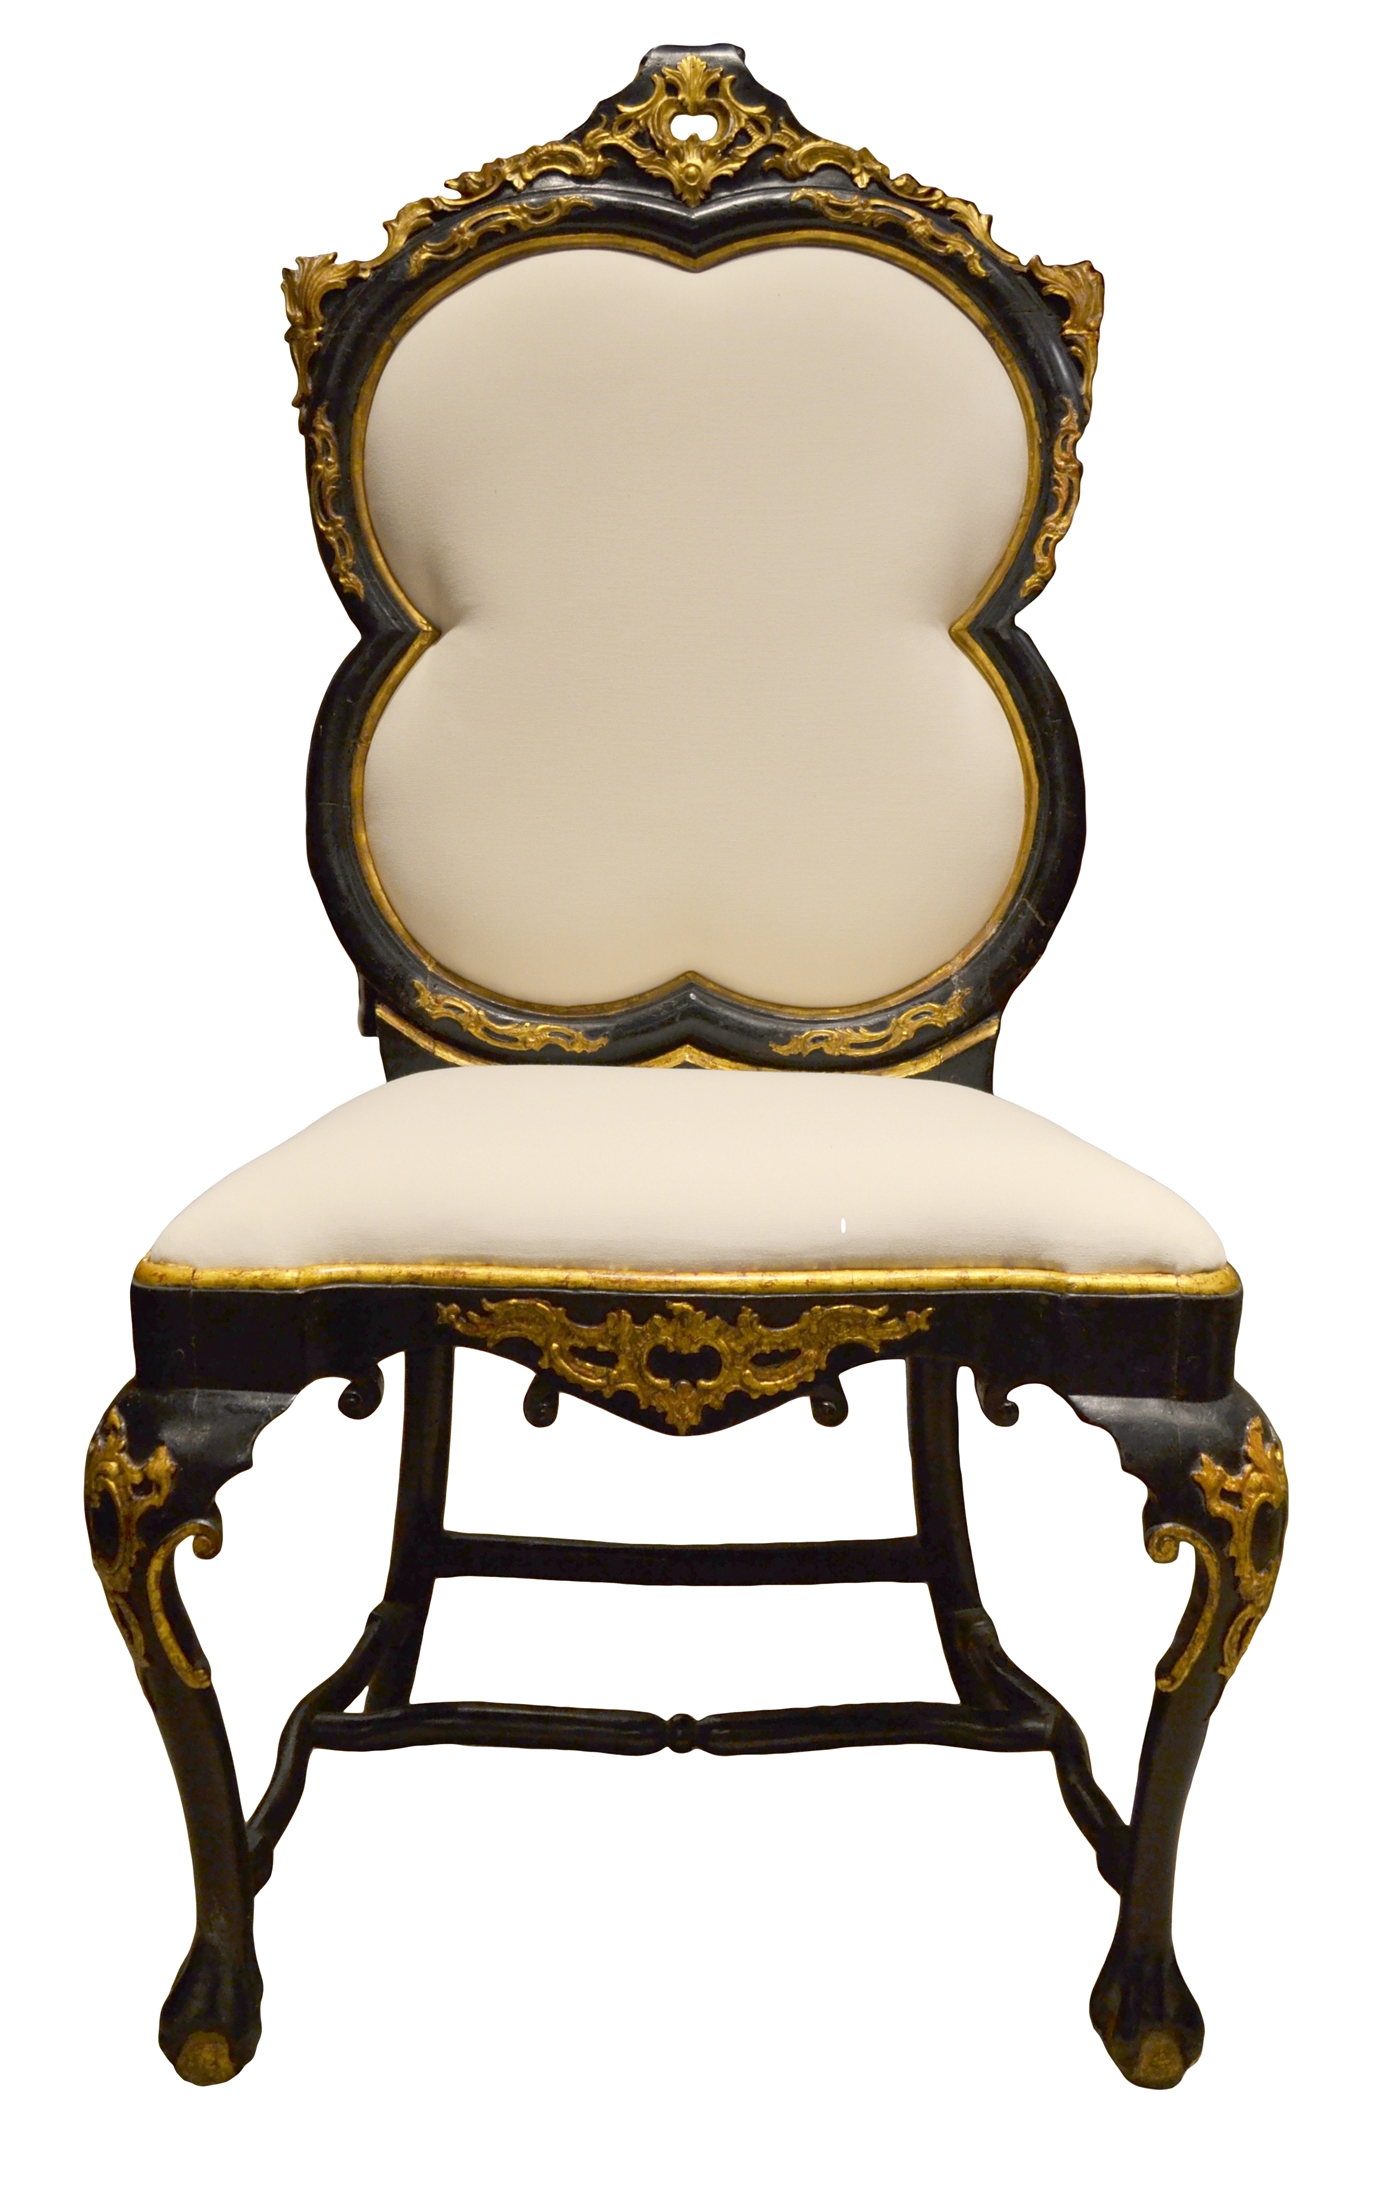 128/2014 - Venetian Black and Gold Hall Chair